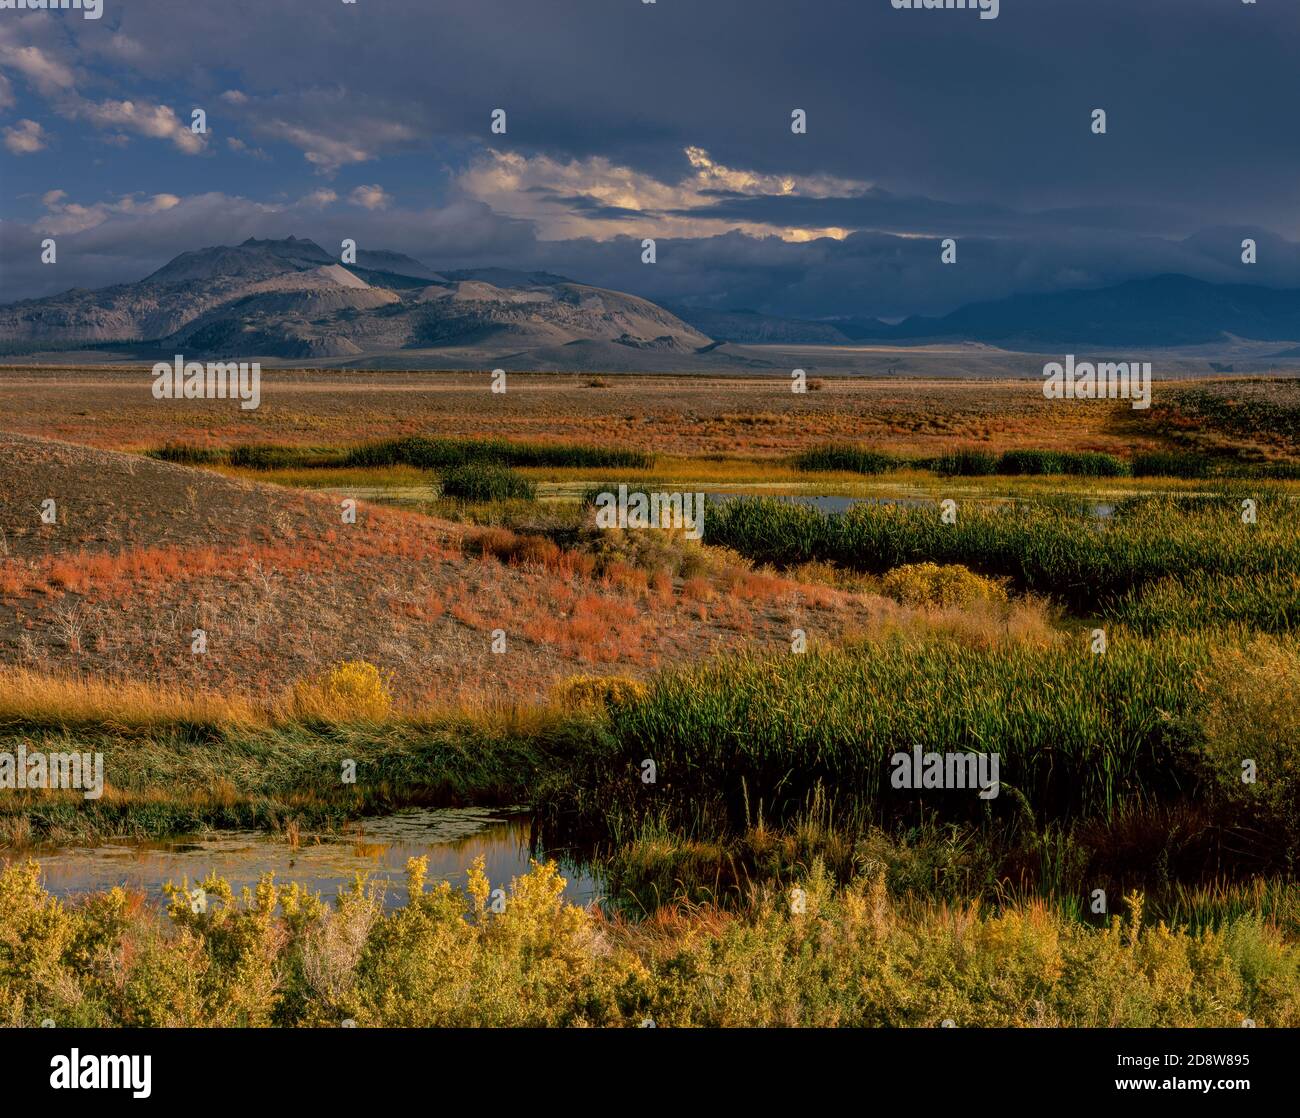 Zone umide, Craters Mono, Mono Basin National Forest Scenic Area, Inyo National Forest, Eastern Sierra, California Foto Stock